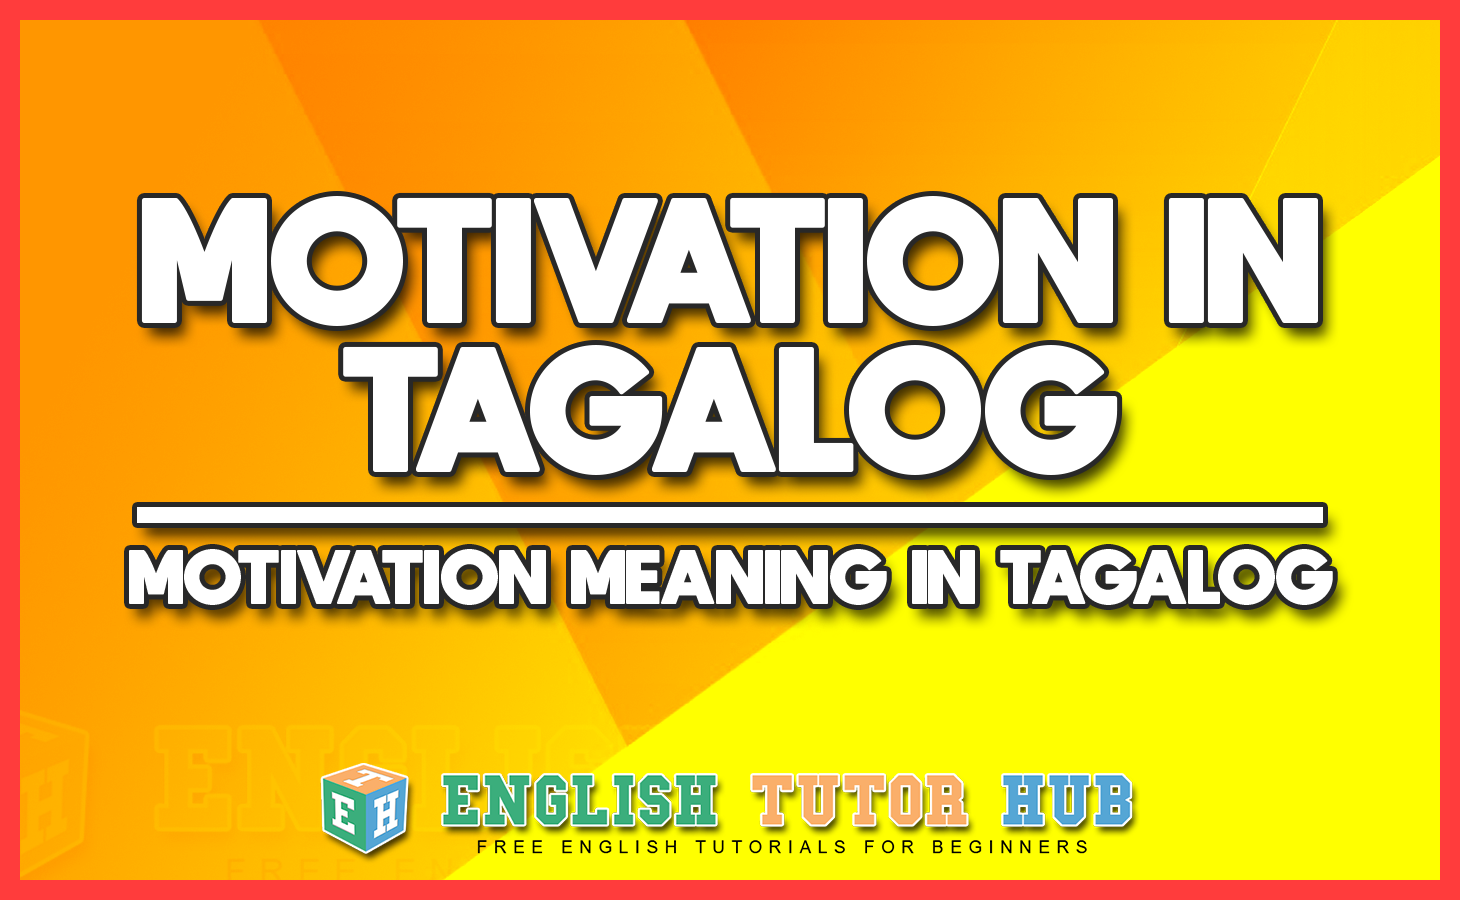 Motivation in Tagalog - Motivation Meaning in Tagalog